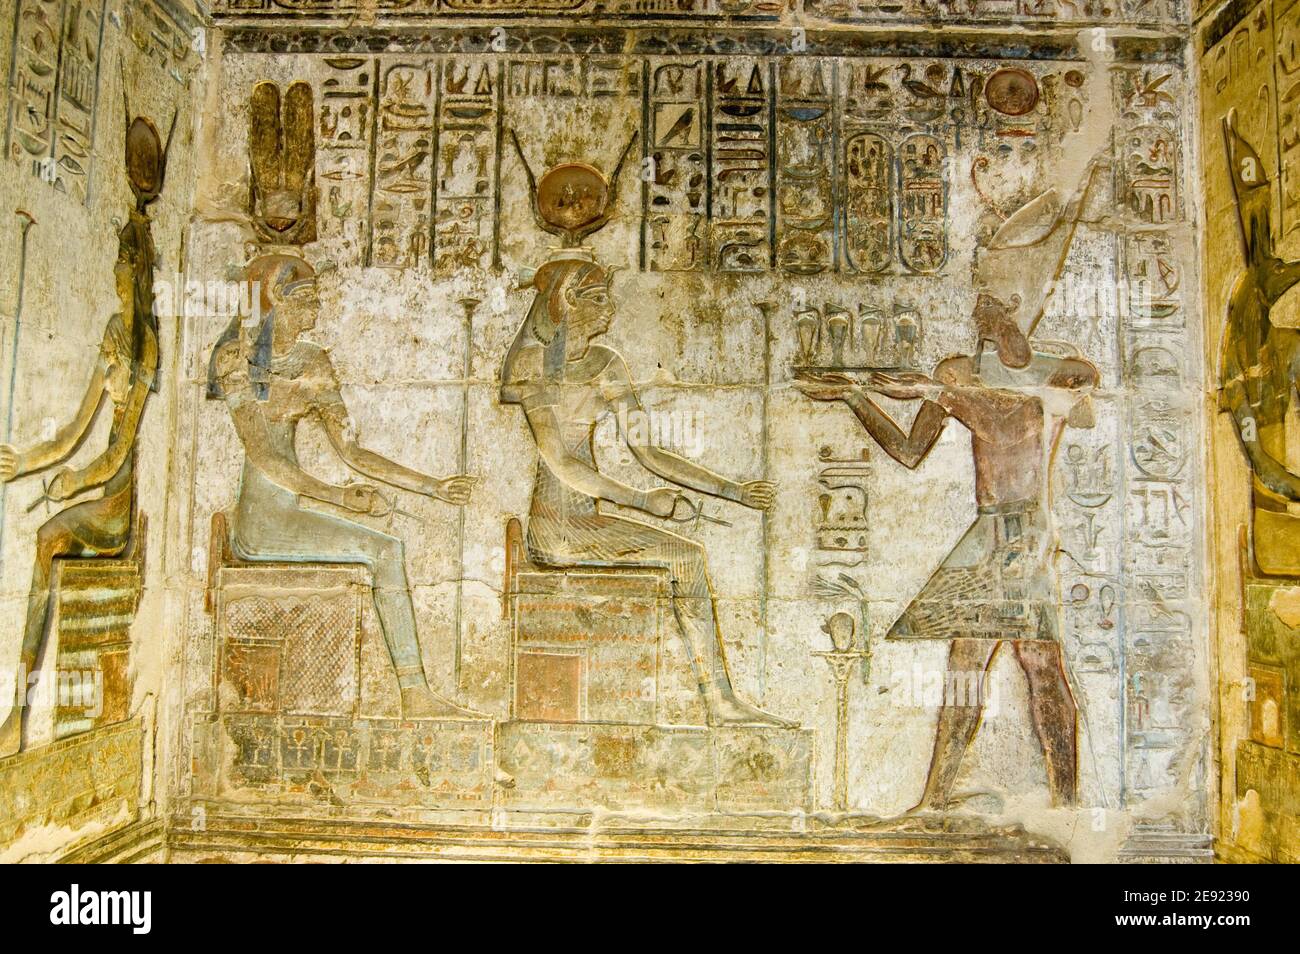 Ancient Egyptian coloured bas relief showing the Pharaoh Ptolemy IV making an offering to the goddesses Hathor and Maat. Temple at Deir el Medina, ove Stock Photo